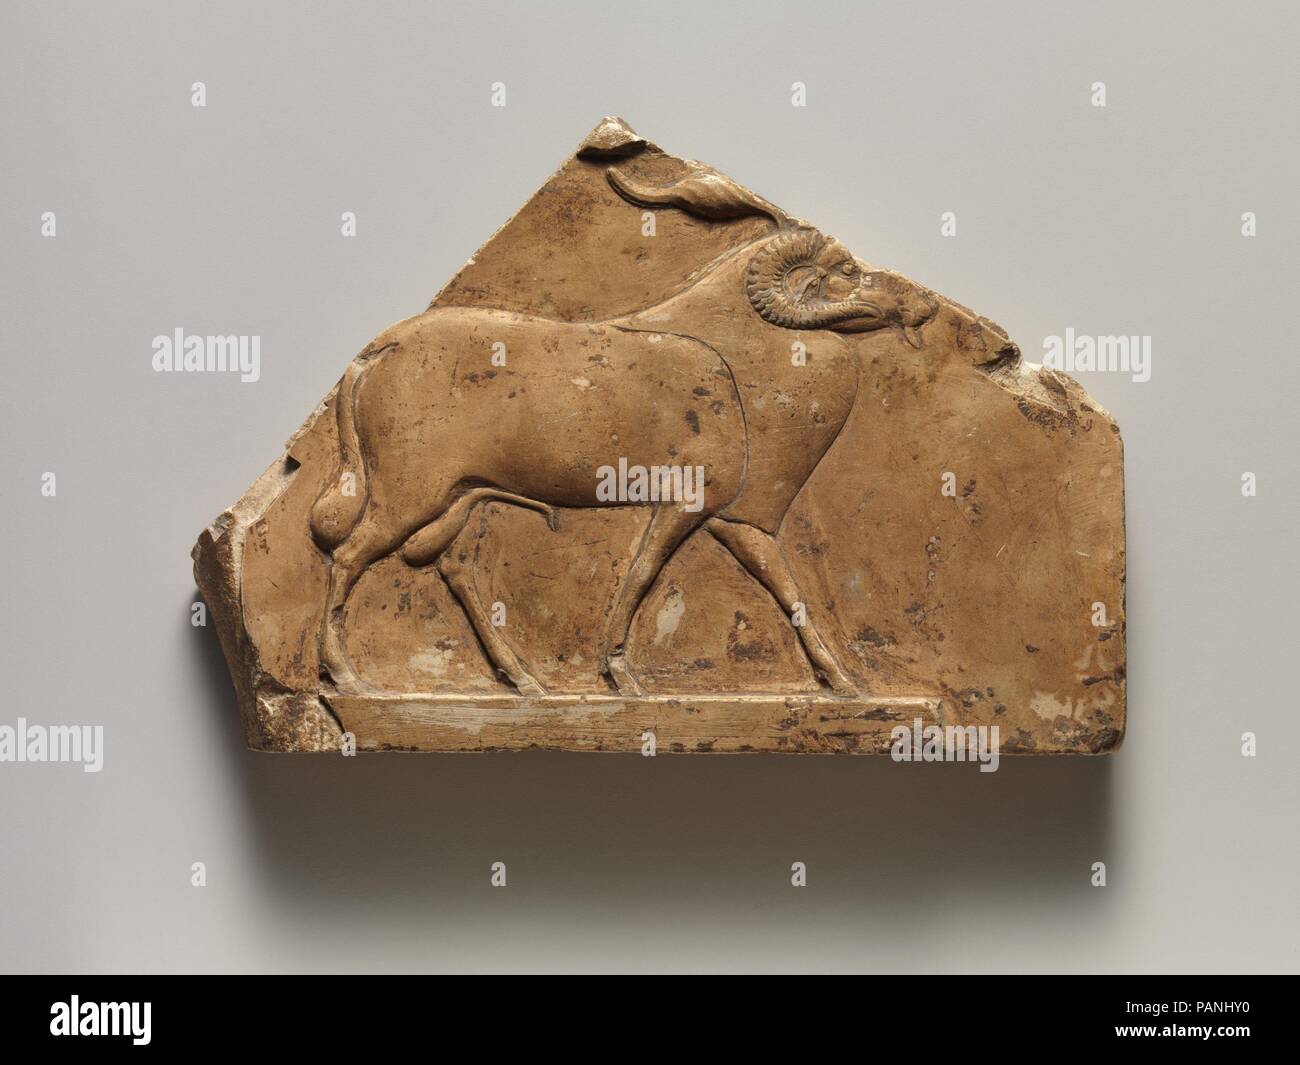 Relief Plaque With Ram And On Opposite Side Two Feet Dimensions H 11 3 Cm 4 7 16 In W 16 5 Cm 6 1 2 In D 2 Cm 13 16 In Date 400 30 B C Small